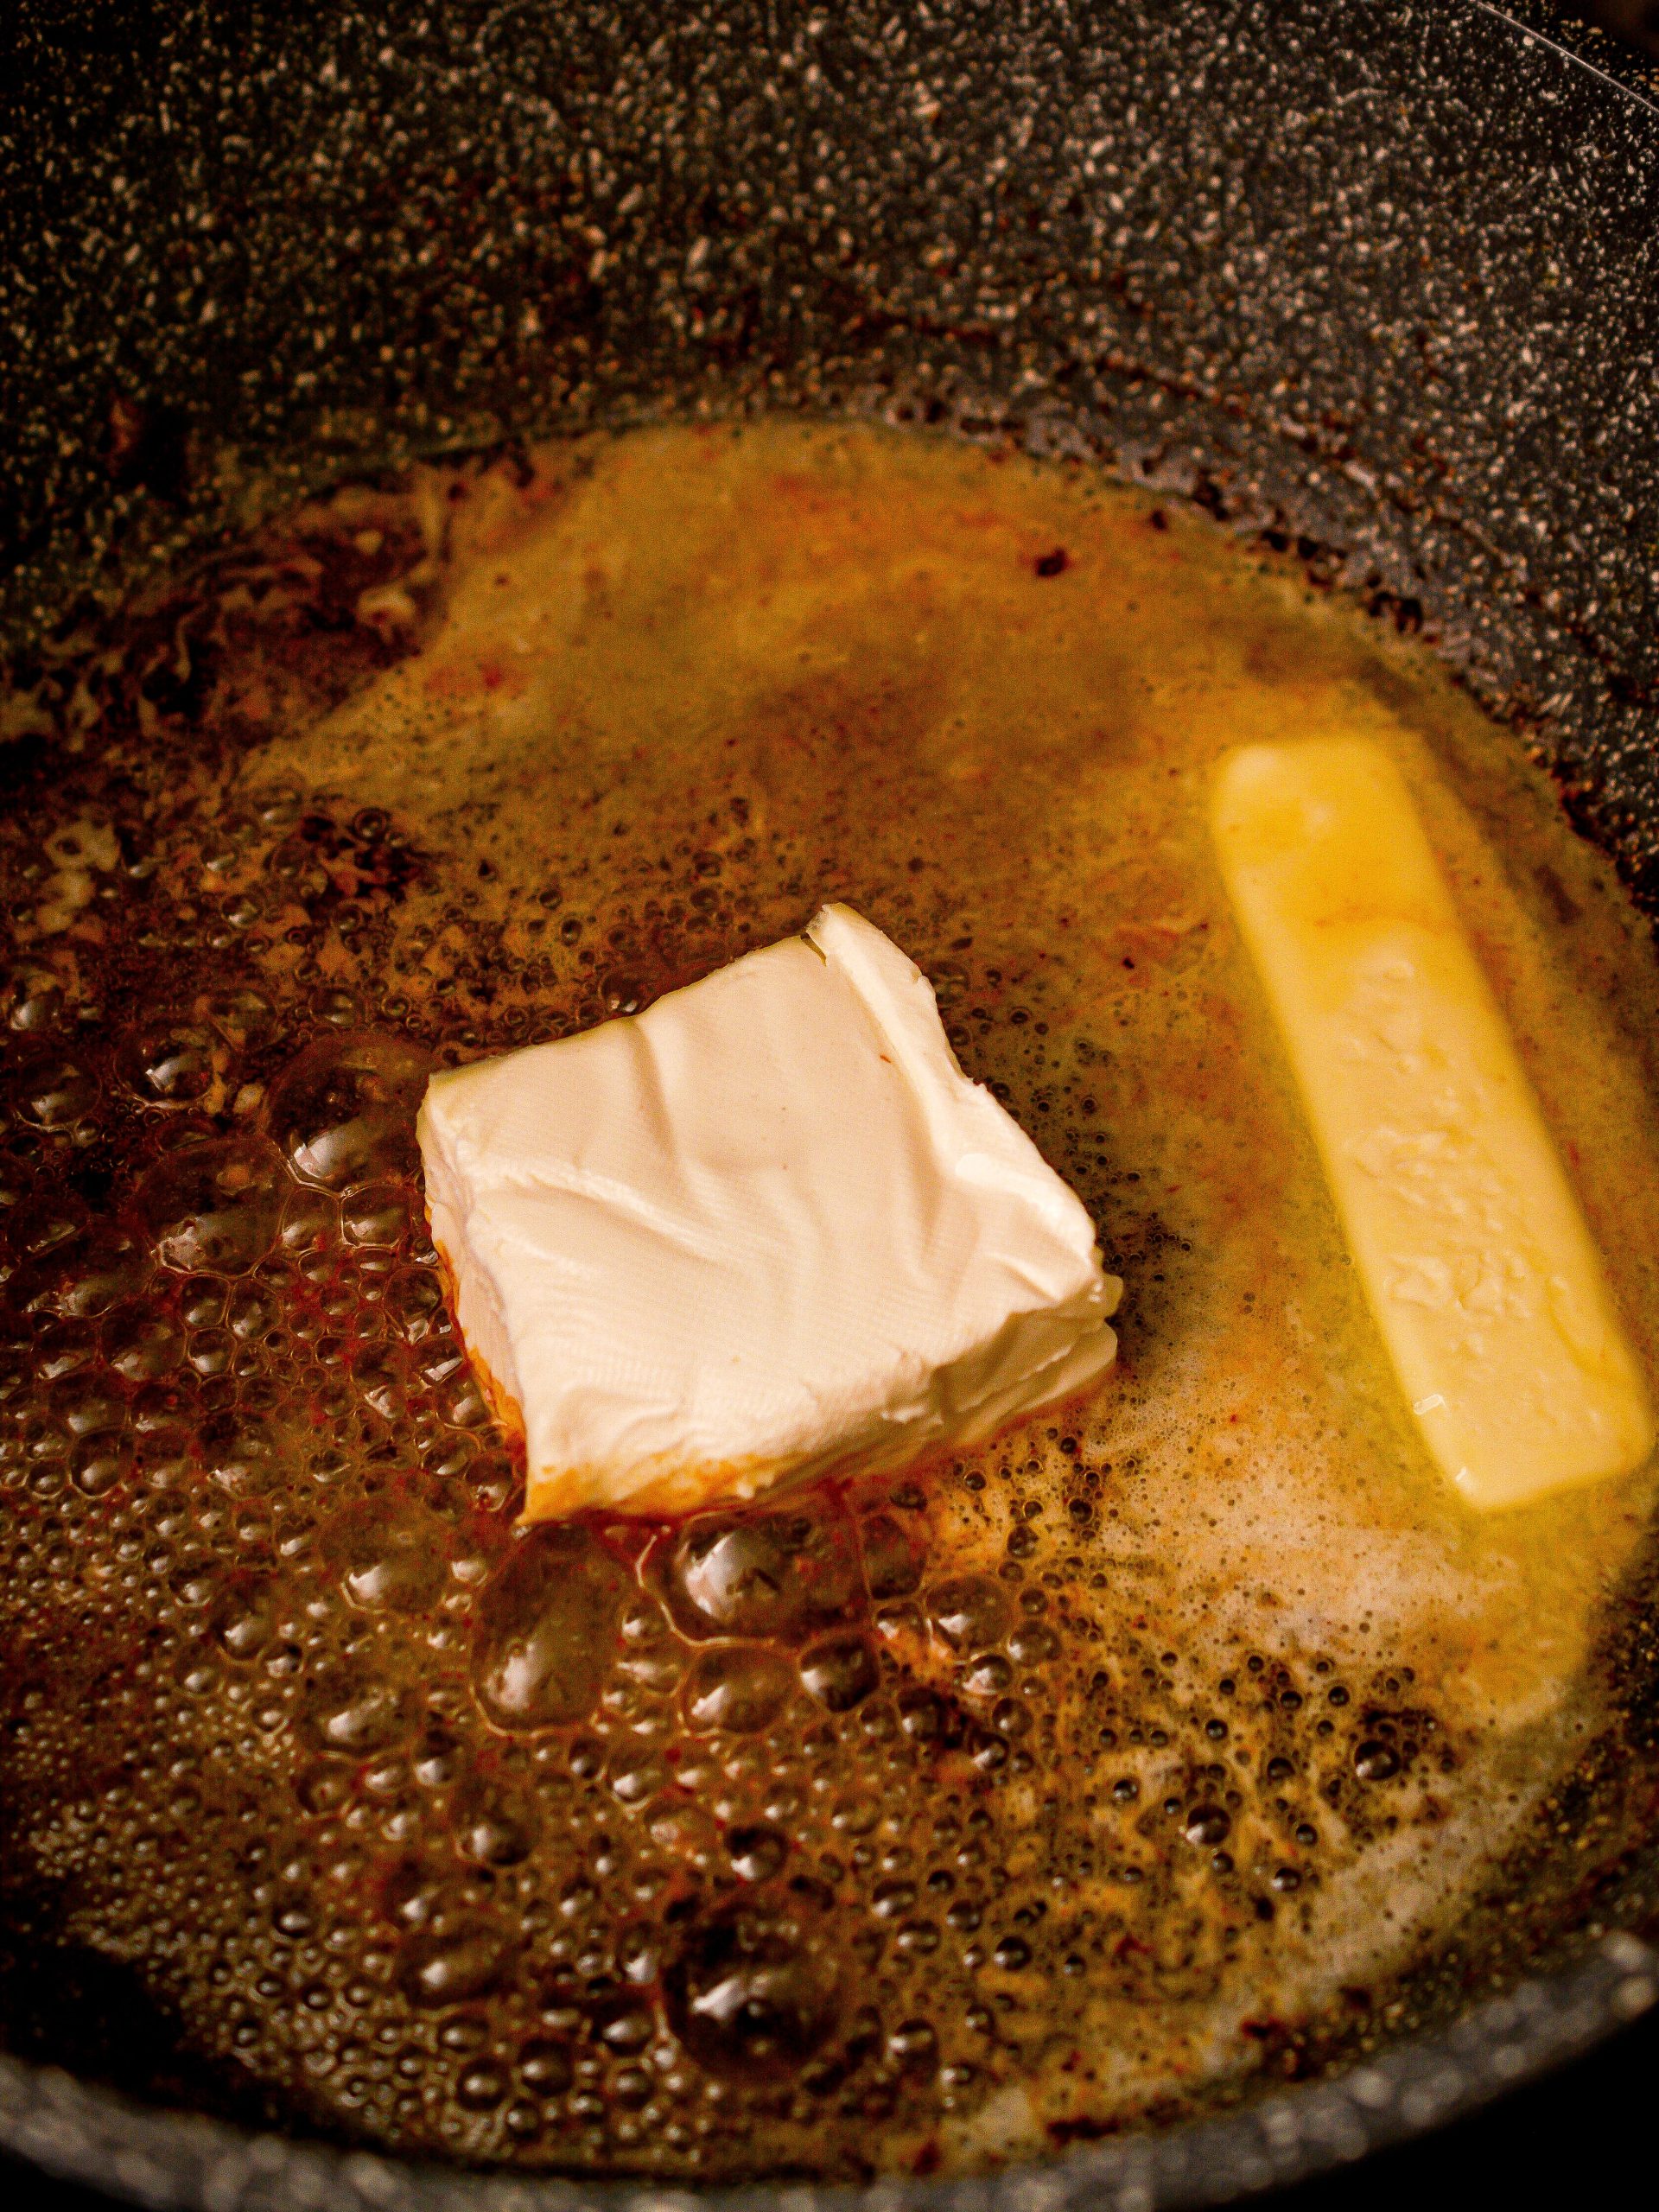 Place the ½ cup butter and 4 oz cream cheese into the skillet.